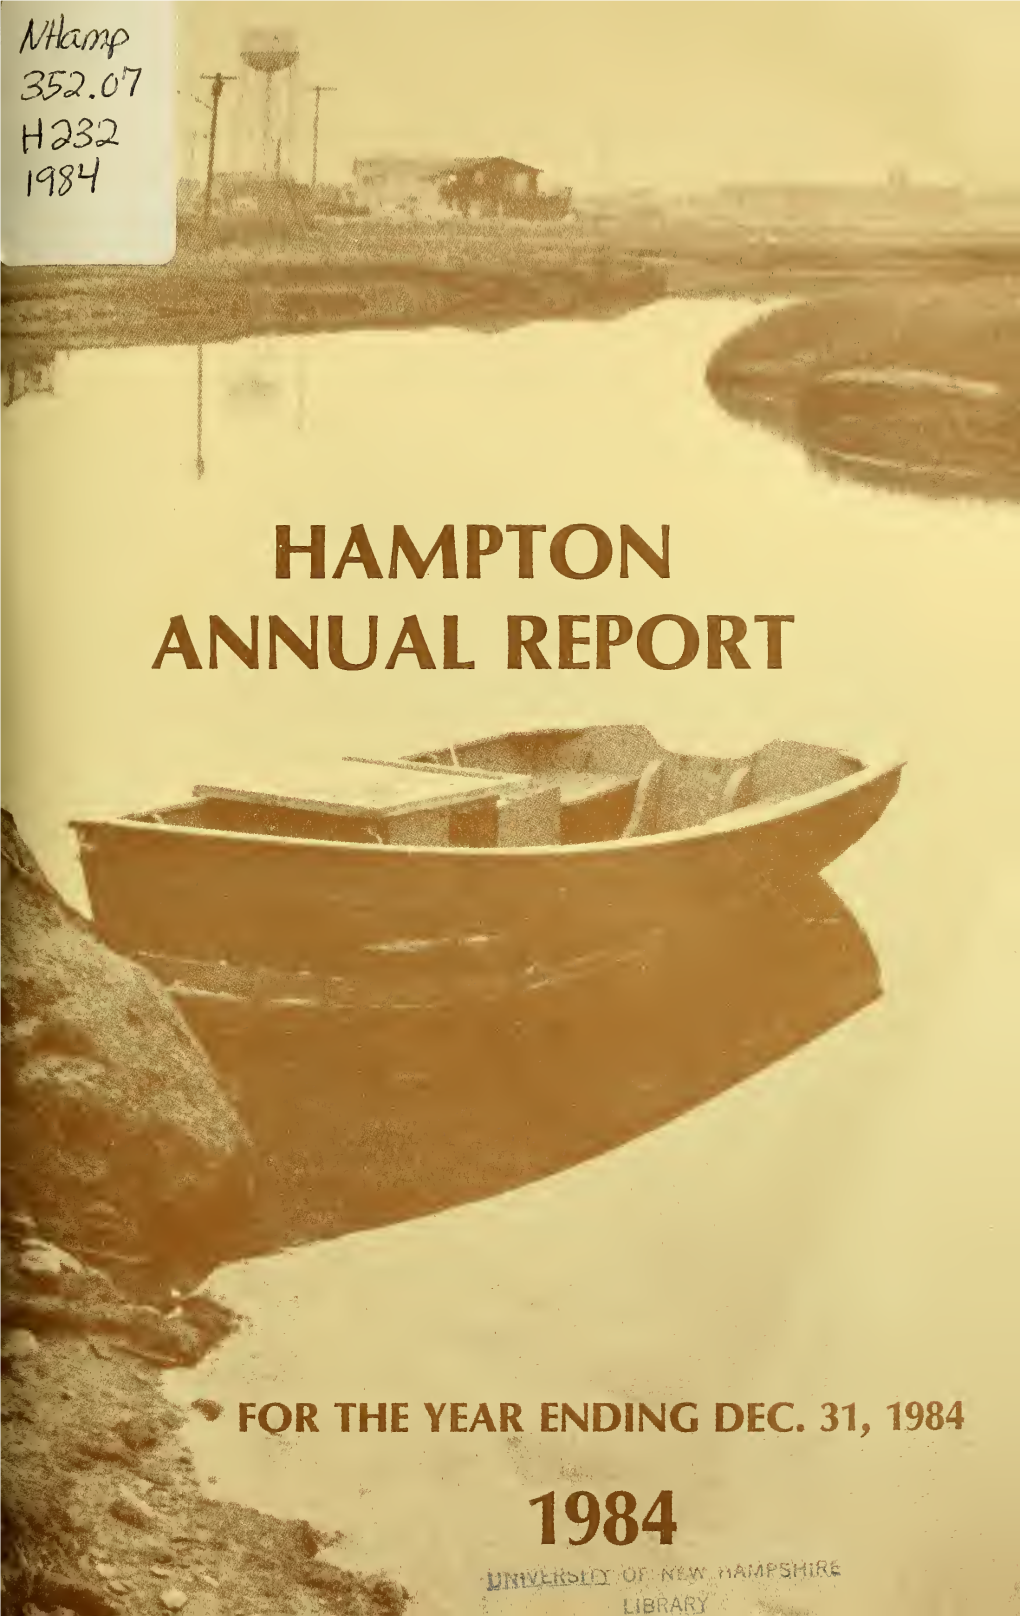 Annual Report of the Town of Hampton, New Hampshire